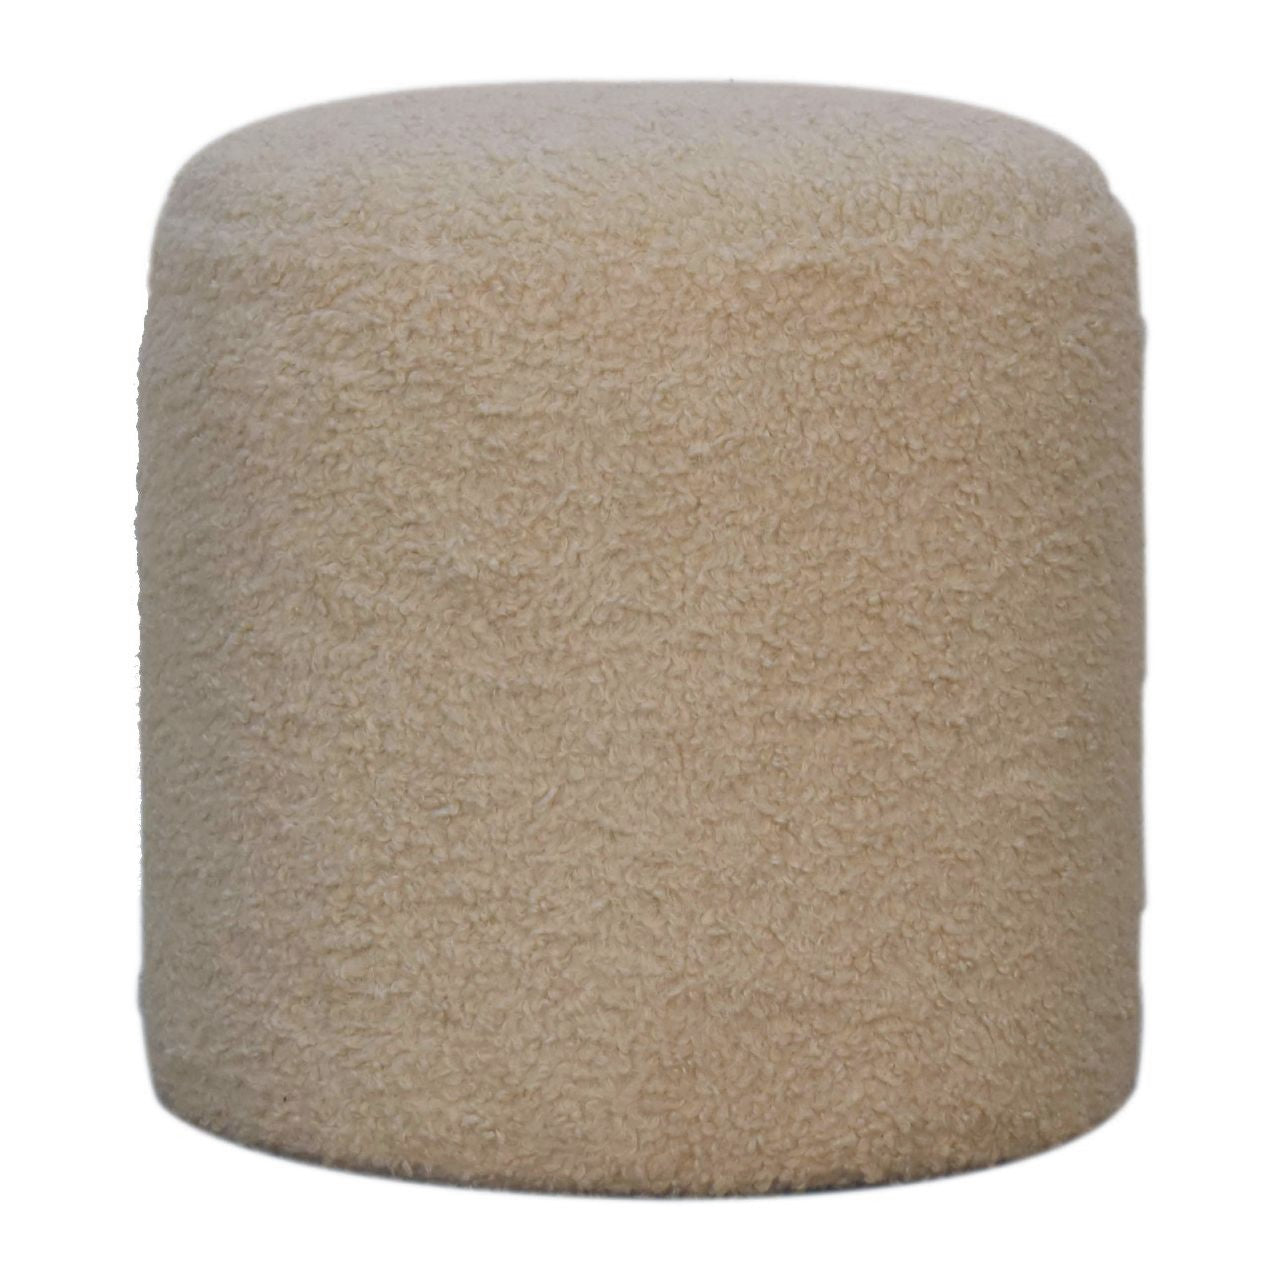 View Boucle Cream Round Footstool information